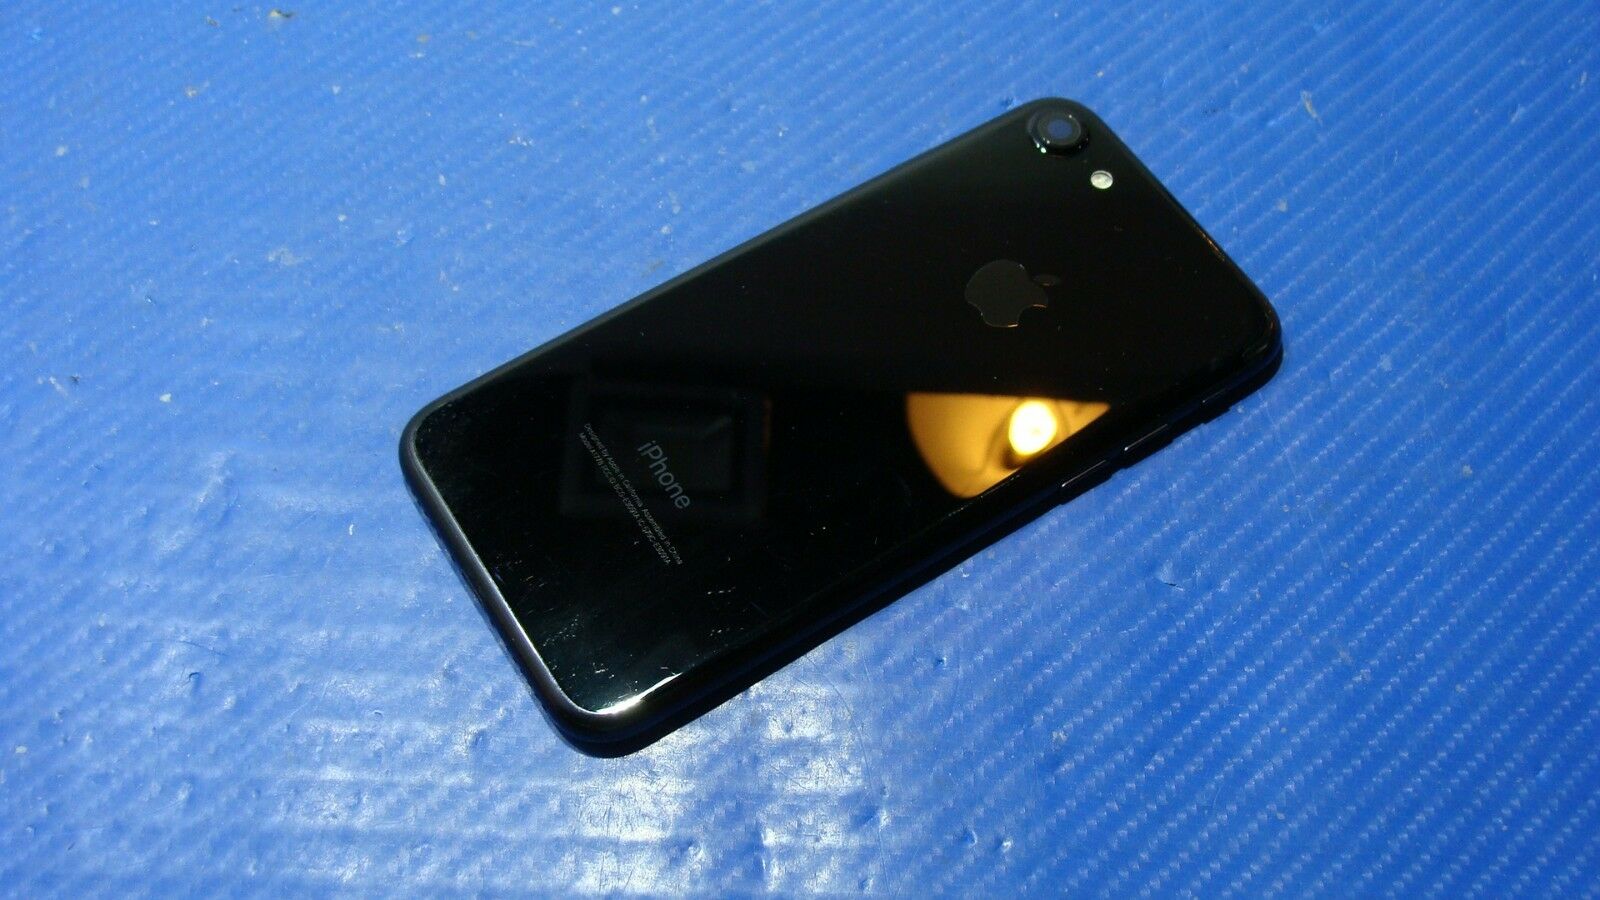 iPhone 7 AT&T A1778 4.7